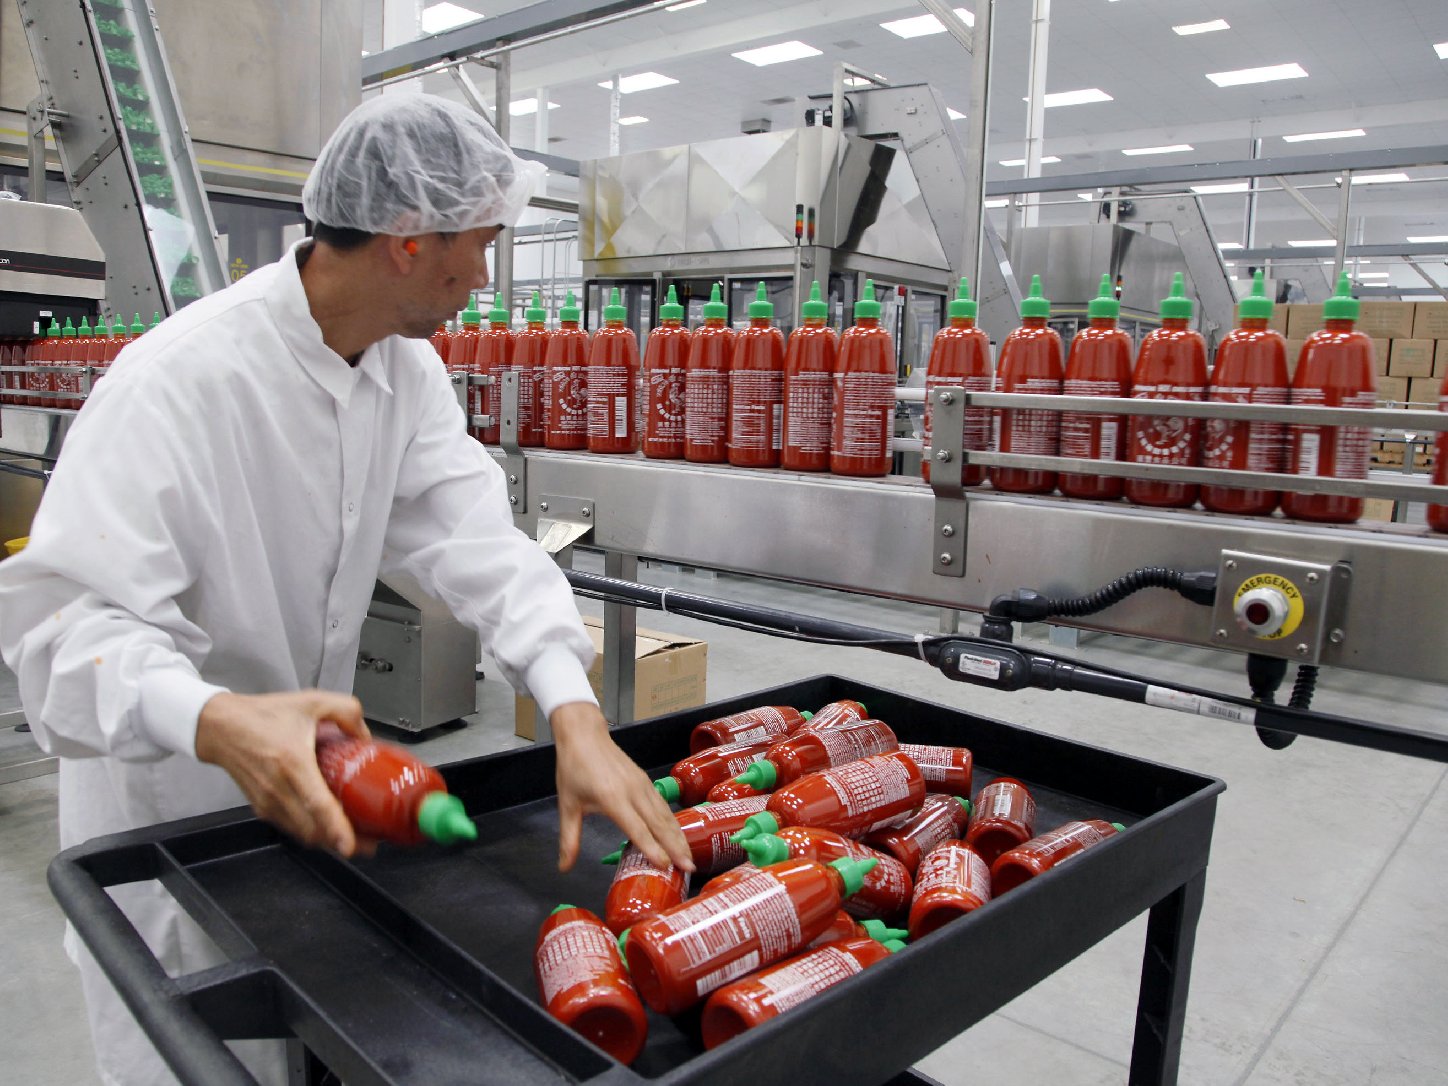 Sriracha chili sauce is produced at the Huy Fong Foods factory in Irwindale, Calif. Photo: Nick Ut/AP